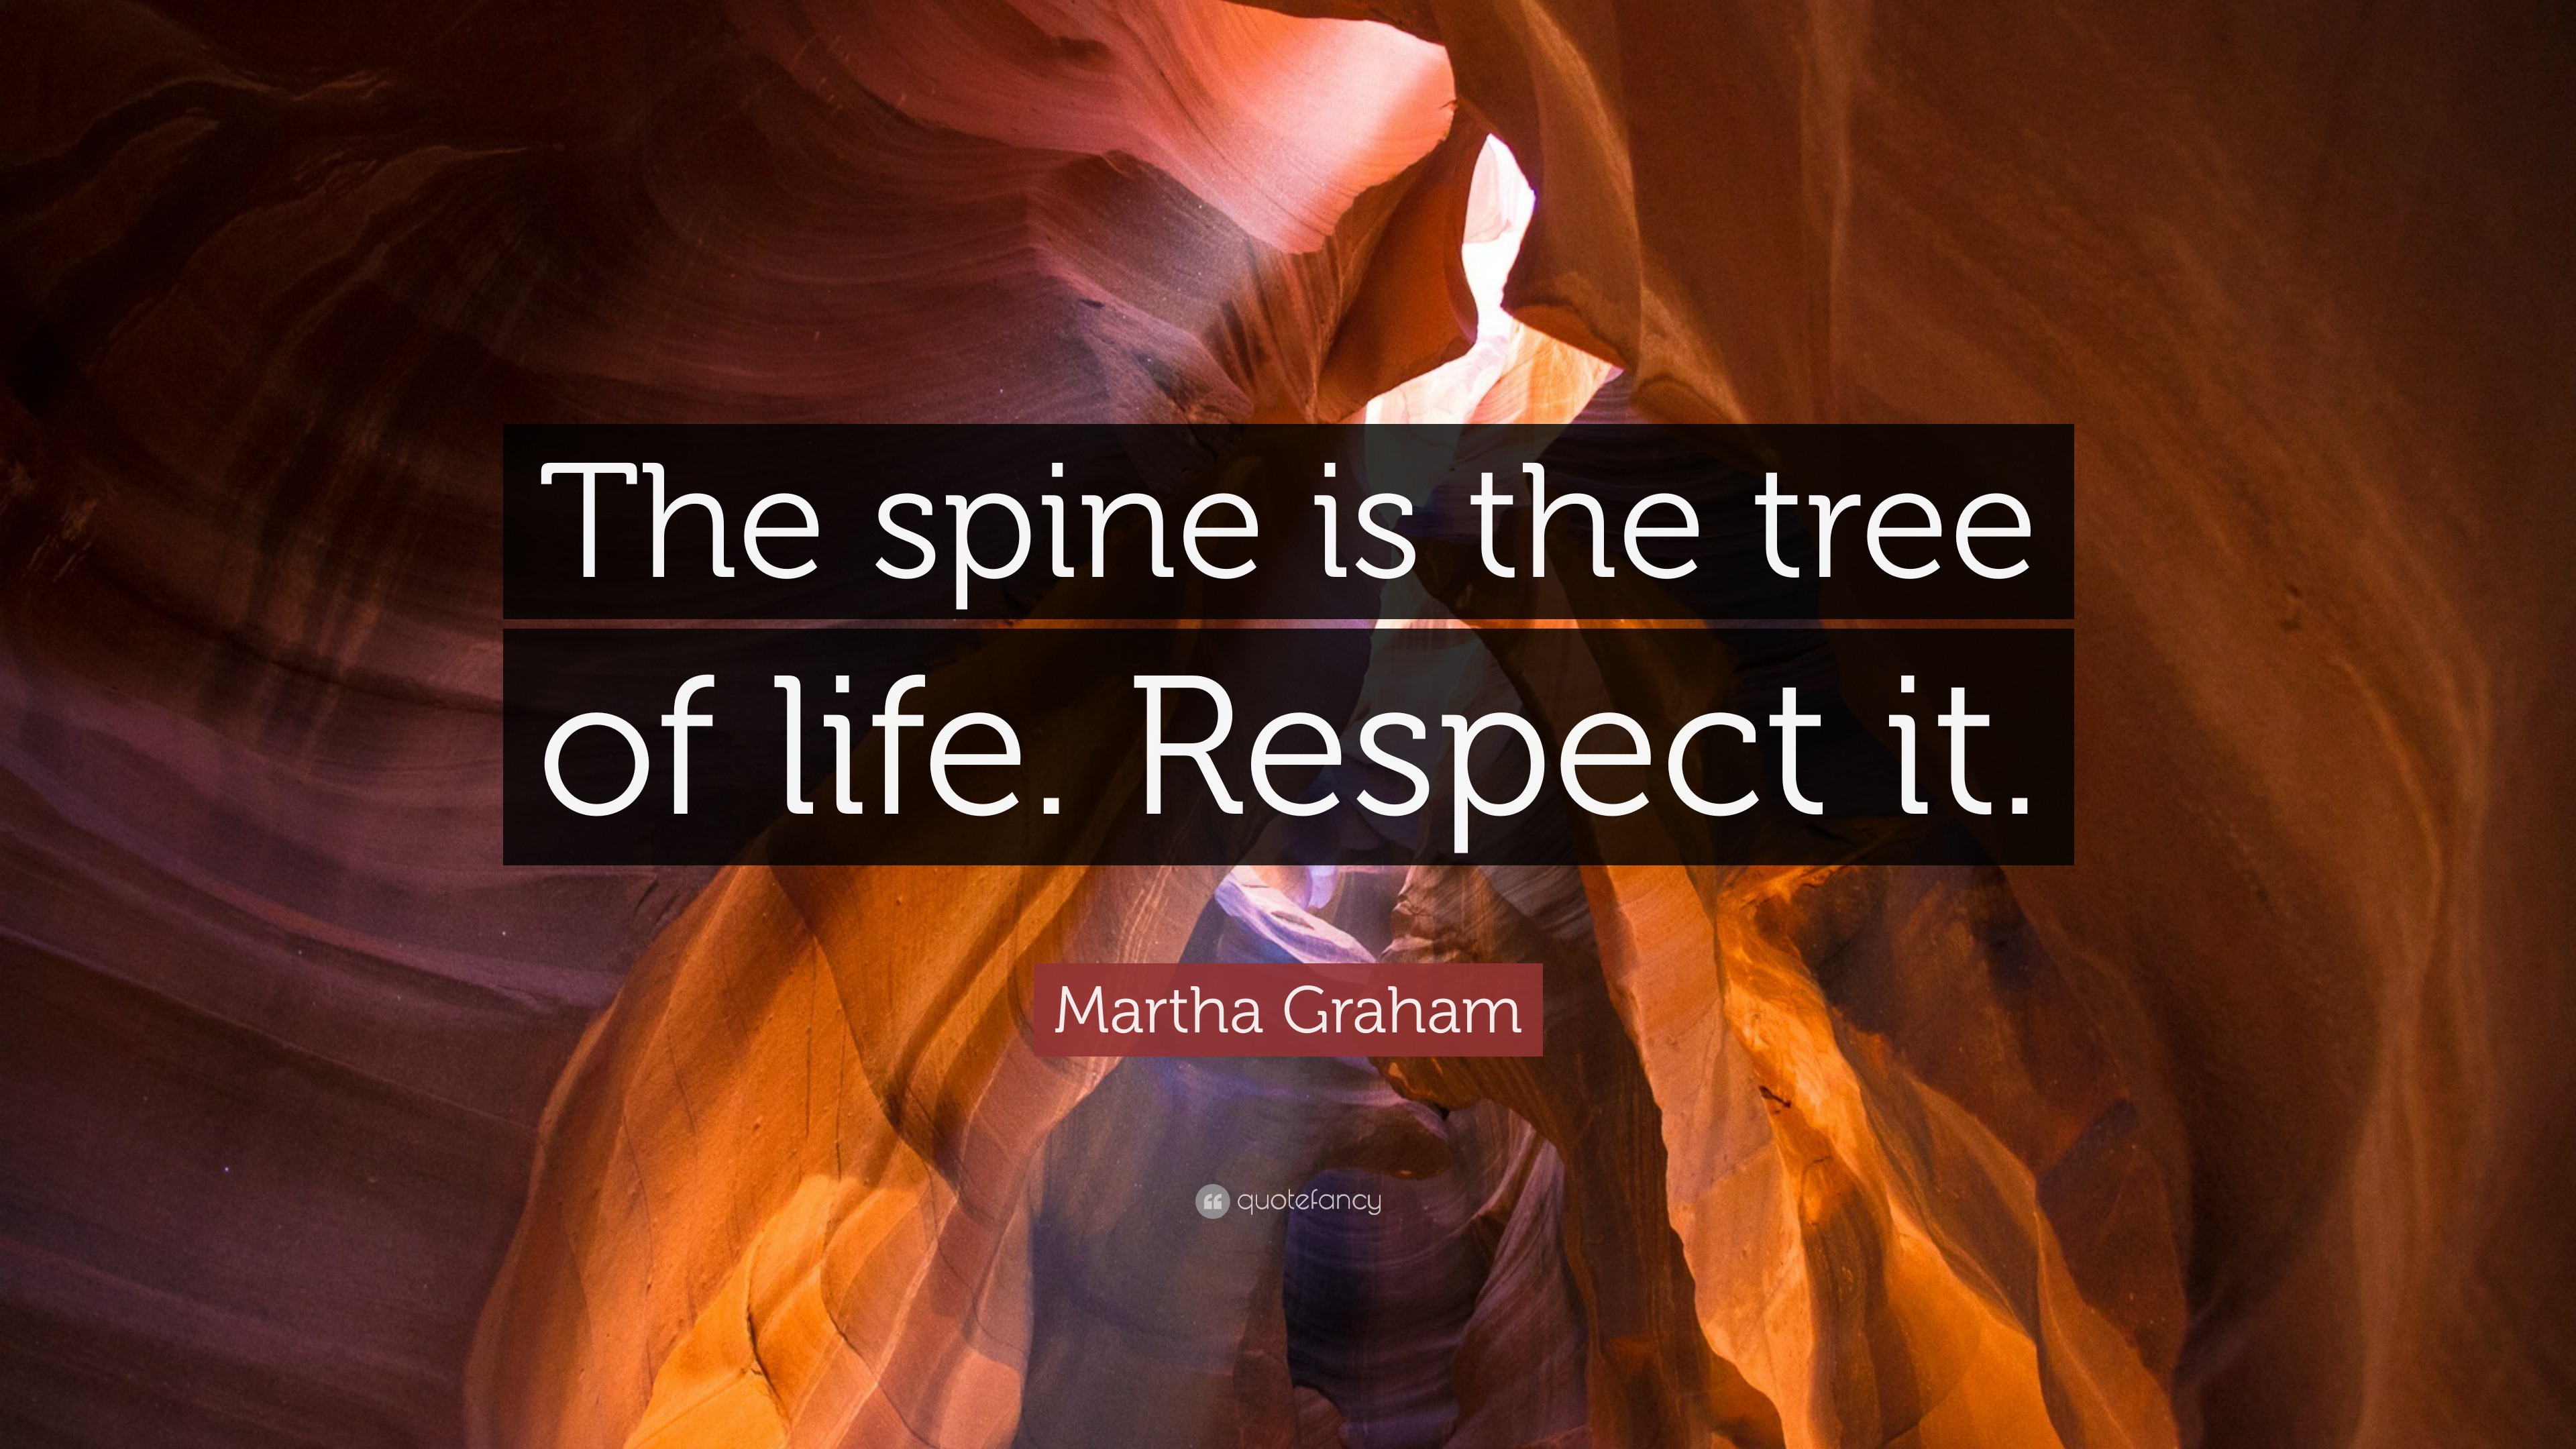 Martha Graham Quote “The spine is the tree of life Respect it